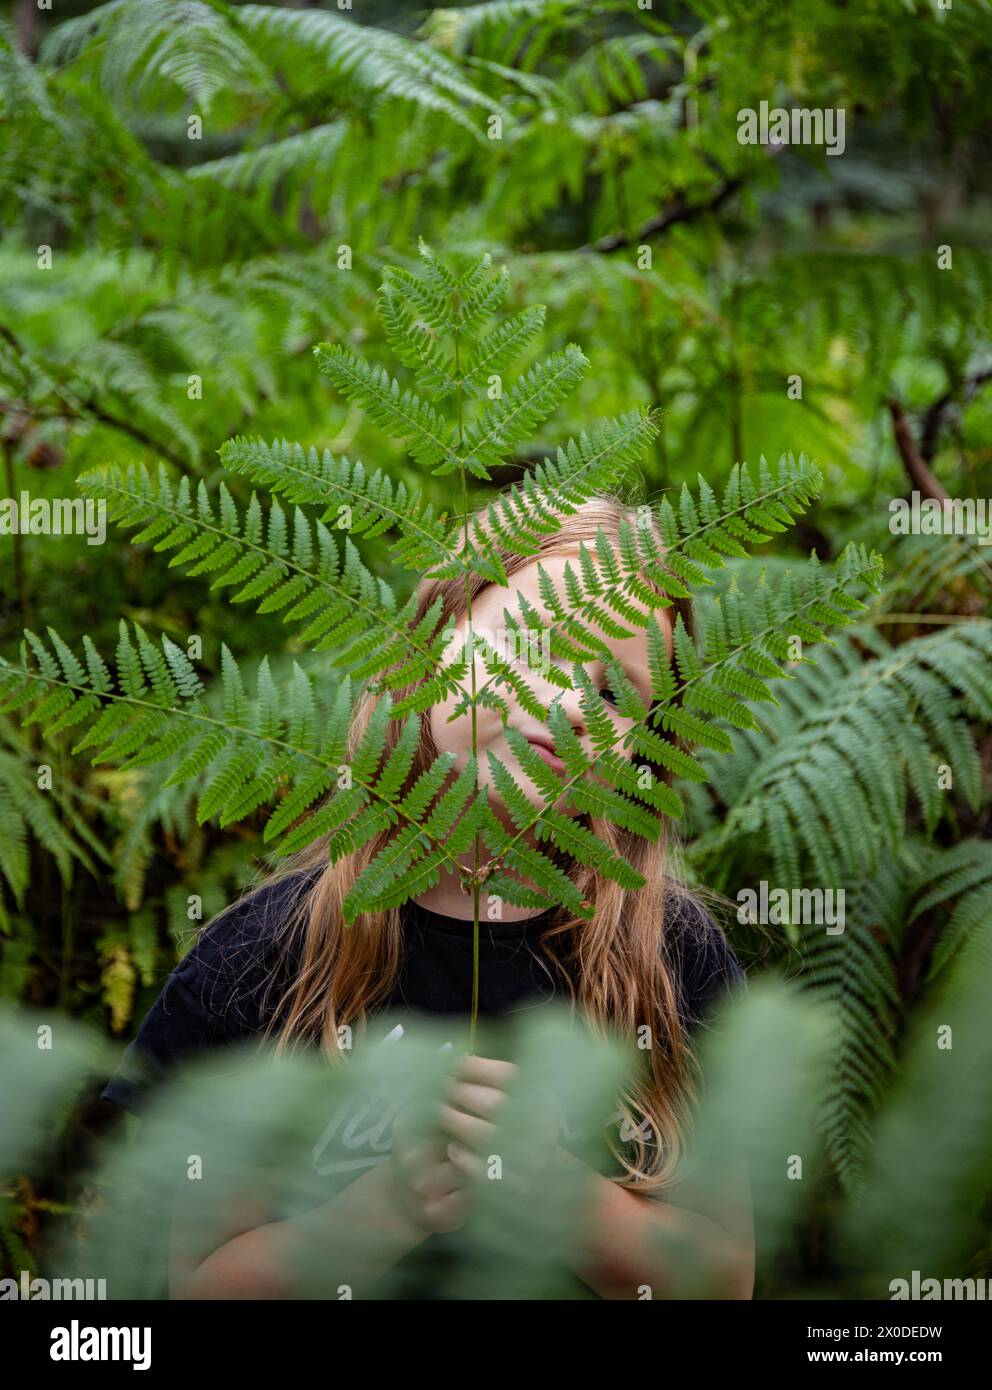 Girl playing with green leaf in a fern forest childhood fun Stock Photo